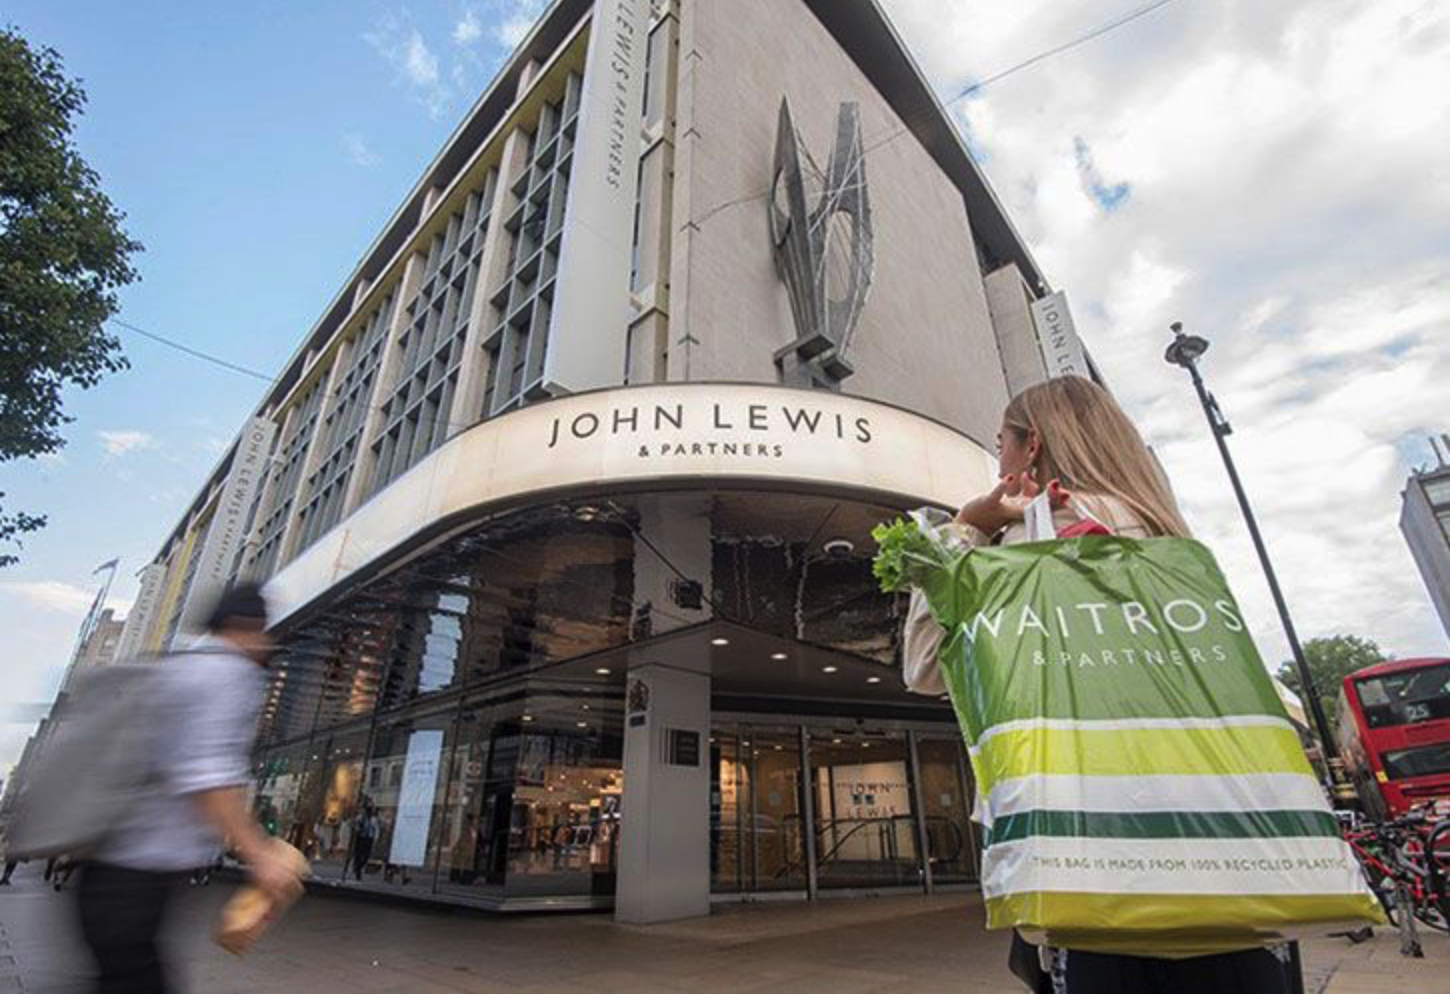 John Lewis to replace ‘Never knowingly undersold’ price promise